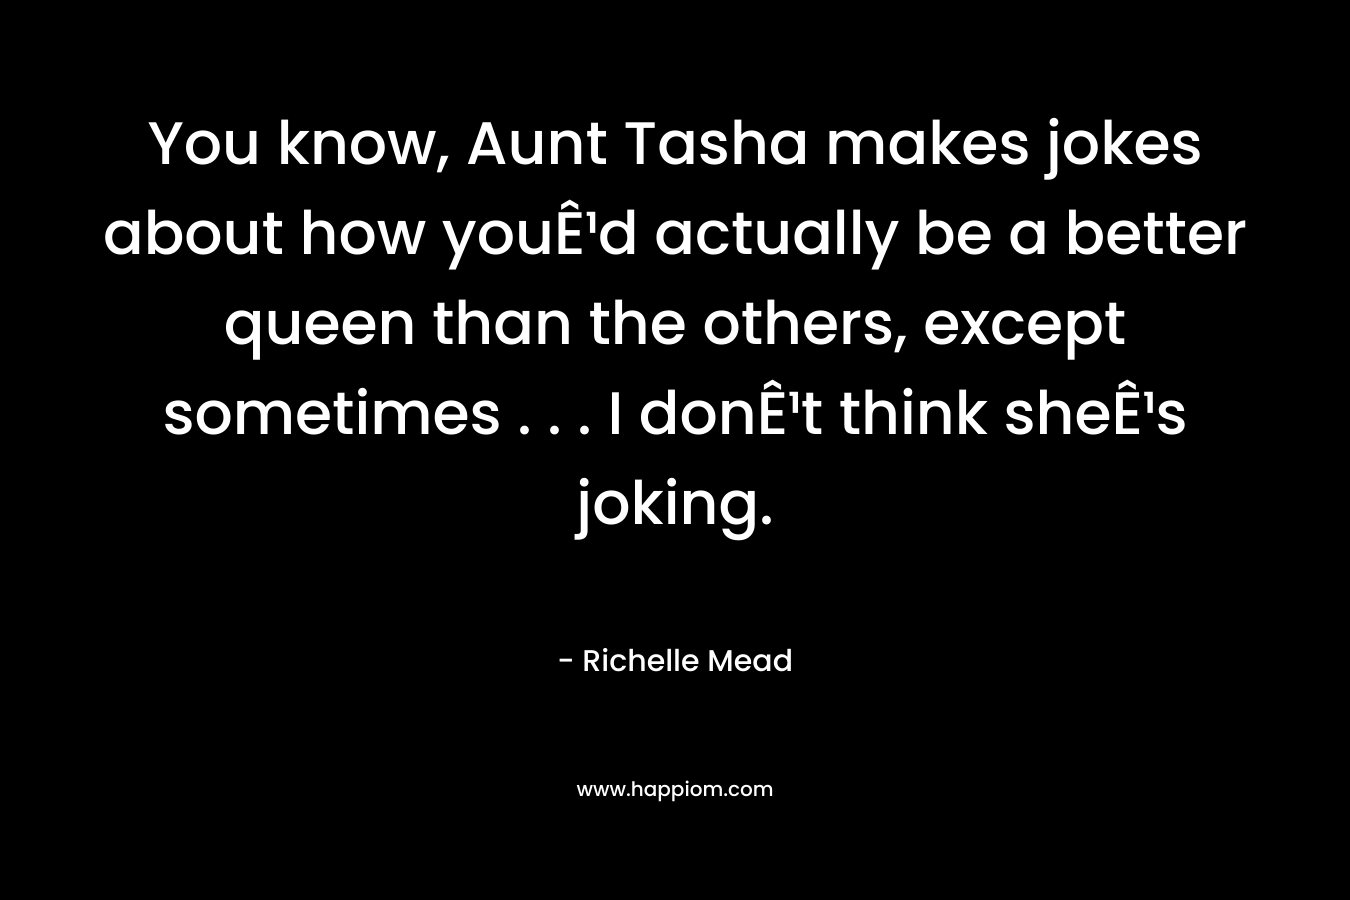 You know, Aunt Tasha makes jokes about how youÊ¹d actually be a better queen than the others, except sometimes . . . I donÊ¹t think sheÊ¹s joking. – Richelle Mead